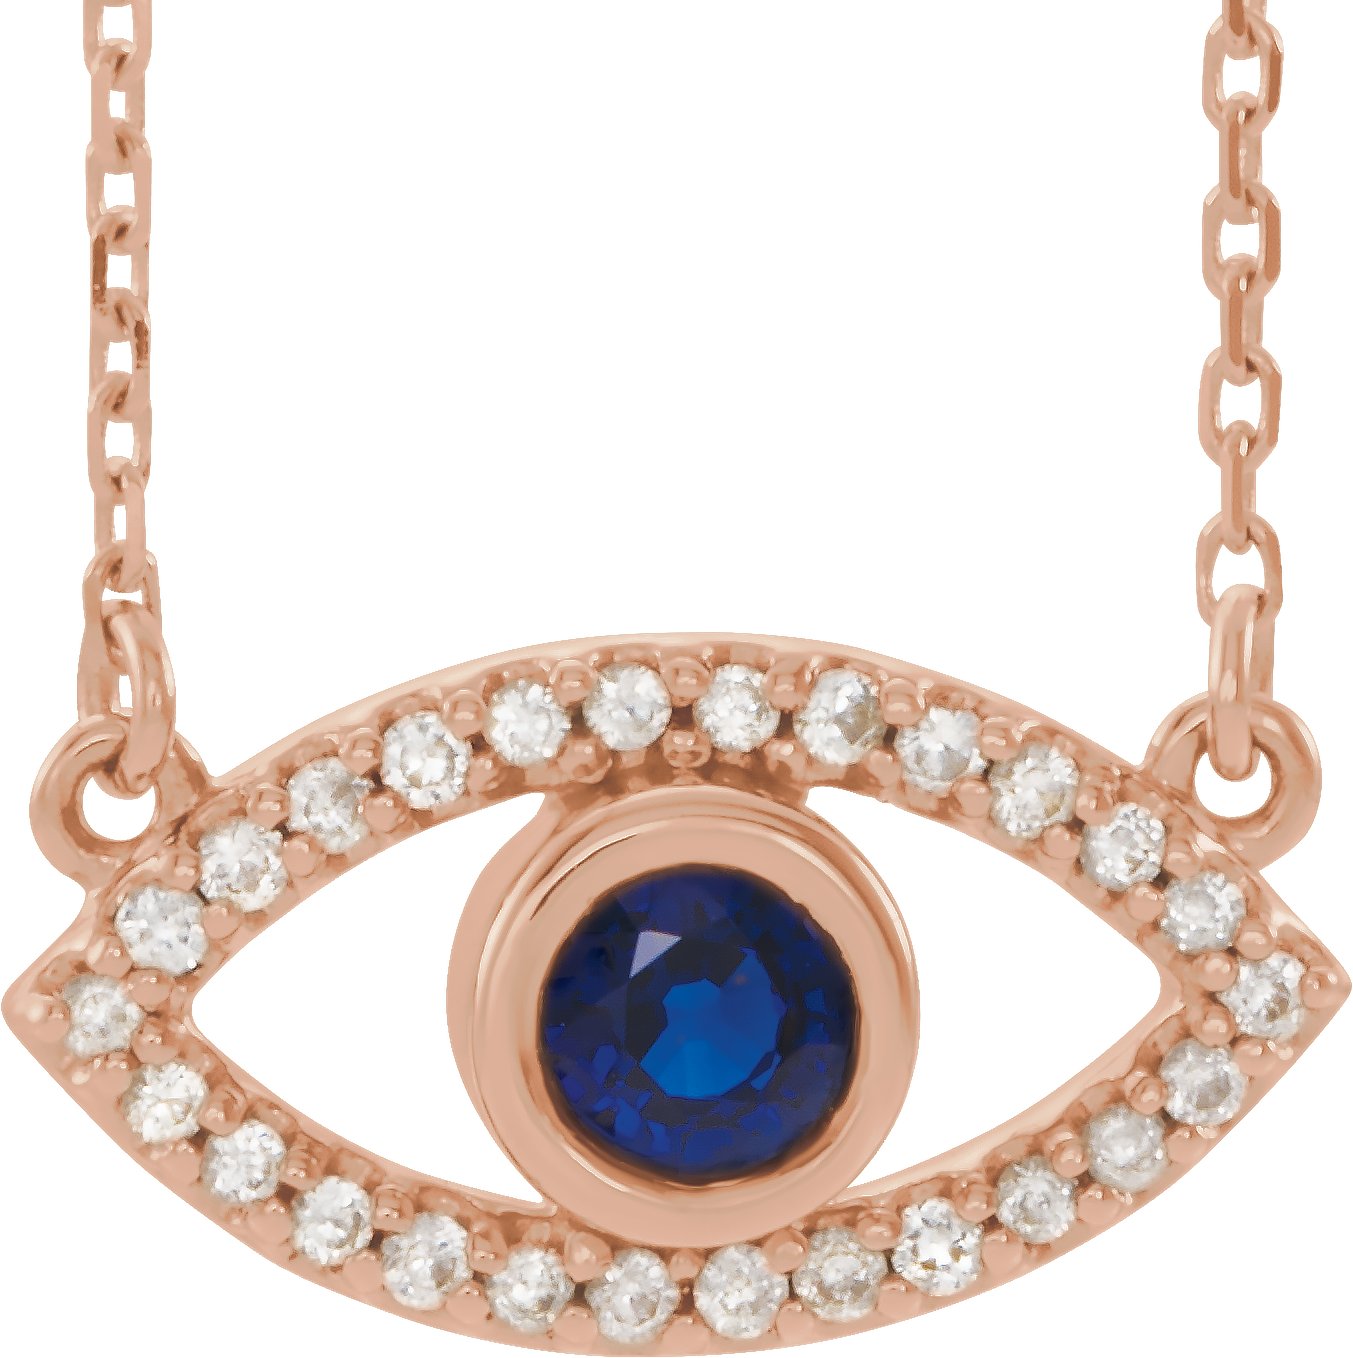 14K Rose Natural Blue Sapphire & Natural White Sapphire Evil Eye 18" Necklace